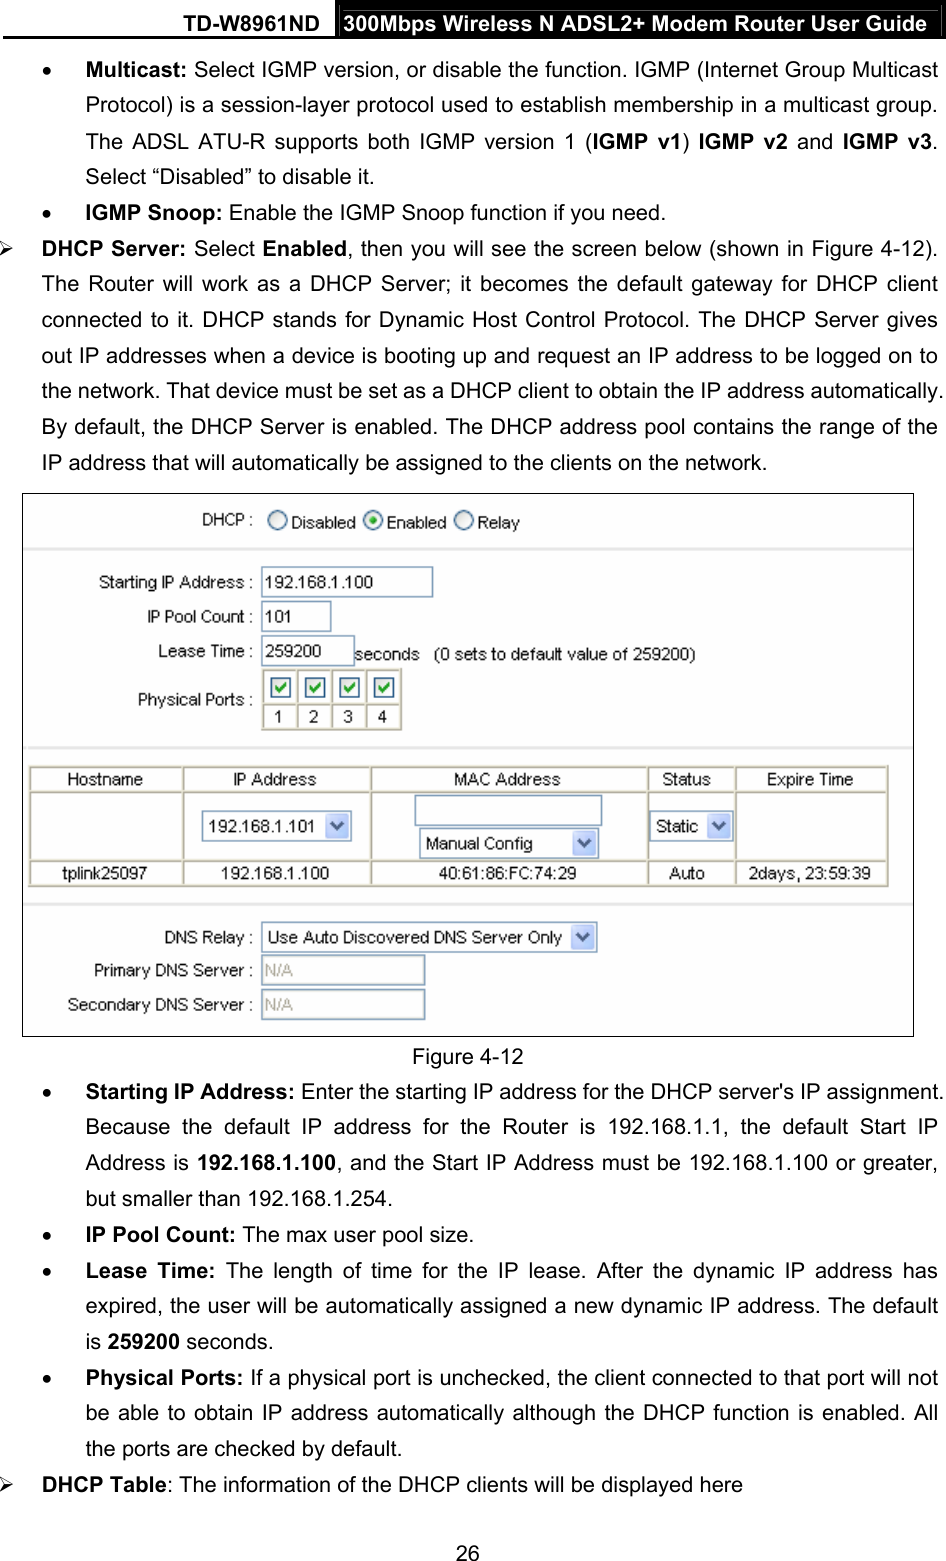 TD-W8961ND  300Mbps Wireless N ADSL2+ Modem Router User Guide  26• Multicast: Select IGMP version, or disable the function. IGMP (Internet Group Multicast Protocol) is a session-layer protocol used to establish membership in a multicast group. The ADSL ATU-R supports both IGMP version 1 (IGMP v1)  IGMP v2 and IGMP v3. Select “Disabled” to disable it. • IGMP Snoop: Enable the IGMP Snoop function if you need. ¾ DHCP Server: Select Enabled, then you will see the screen below (shown in Figure 4-12). The Router will work as a DHCP Server; it becomes the default gateway for DHCP client connected to it. DHCP stands for Dynamic Host Control Protocol. The DHCP Server gives out IP addresses when a device is booting up and request an IP address to be logged on to the network. That device must be set as a DHCP client to obtain the IP address automatically. By default, the DHCP Server is enabled. The DHCP address pool contains the range of the IP address that will automatically be assigned to the clients on the network.    Figure 4-12 • Starting IP Address: Enter the starting IP address for the DHCP server&apos;s IP assignment. Because the default IP address for the Router is 192.168.1.1, the default Start IP Address is 192.168.1.100, and the Start IP Address must be 192.168.1.100 or greater, but smaller than 192.168.1.254. • IP Pool Count: The max user pool size. • Lease Time: The length of time for the IP lease. After the dynamic IP address has expired, the user will be automatically assigned a new dynamic IP address. The default is 259200 seconds. • Physical Ports: If a physical port is unchecked, the client connected to that port will not be able to obtain IP address automatically although the DHCP function is enabled. All the ports are checked by default. ¾ DHCP Table: The information of the DHCP clients will be displayed here 